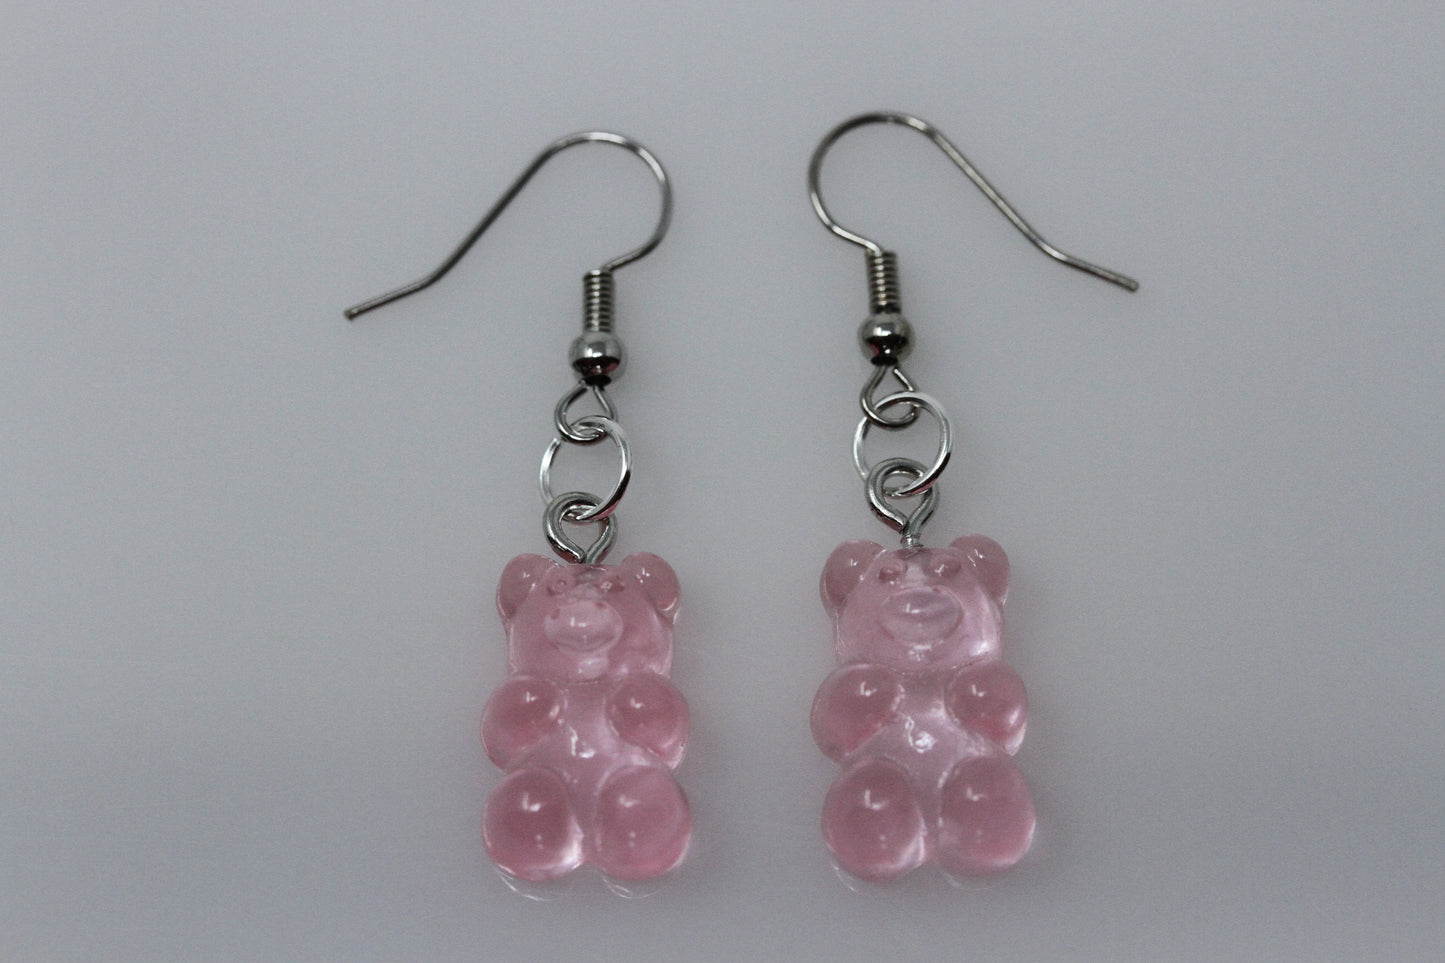 Strawberry Gummi Stainless Steel Danglers - Screw on Tunnel (Pair) - TF017